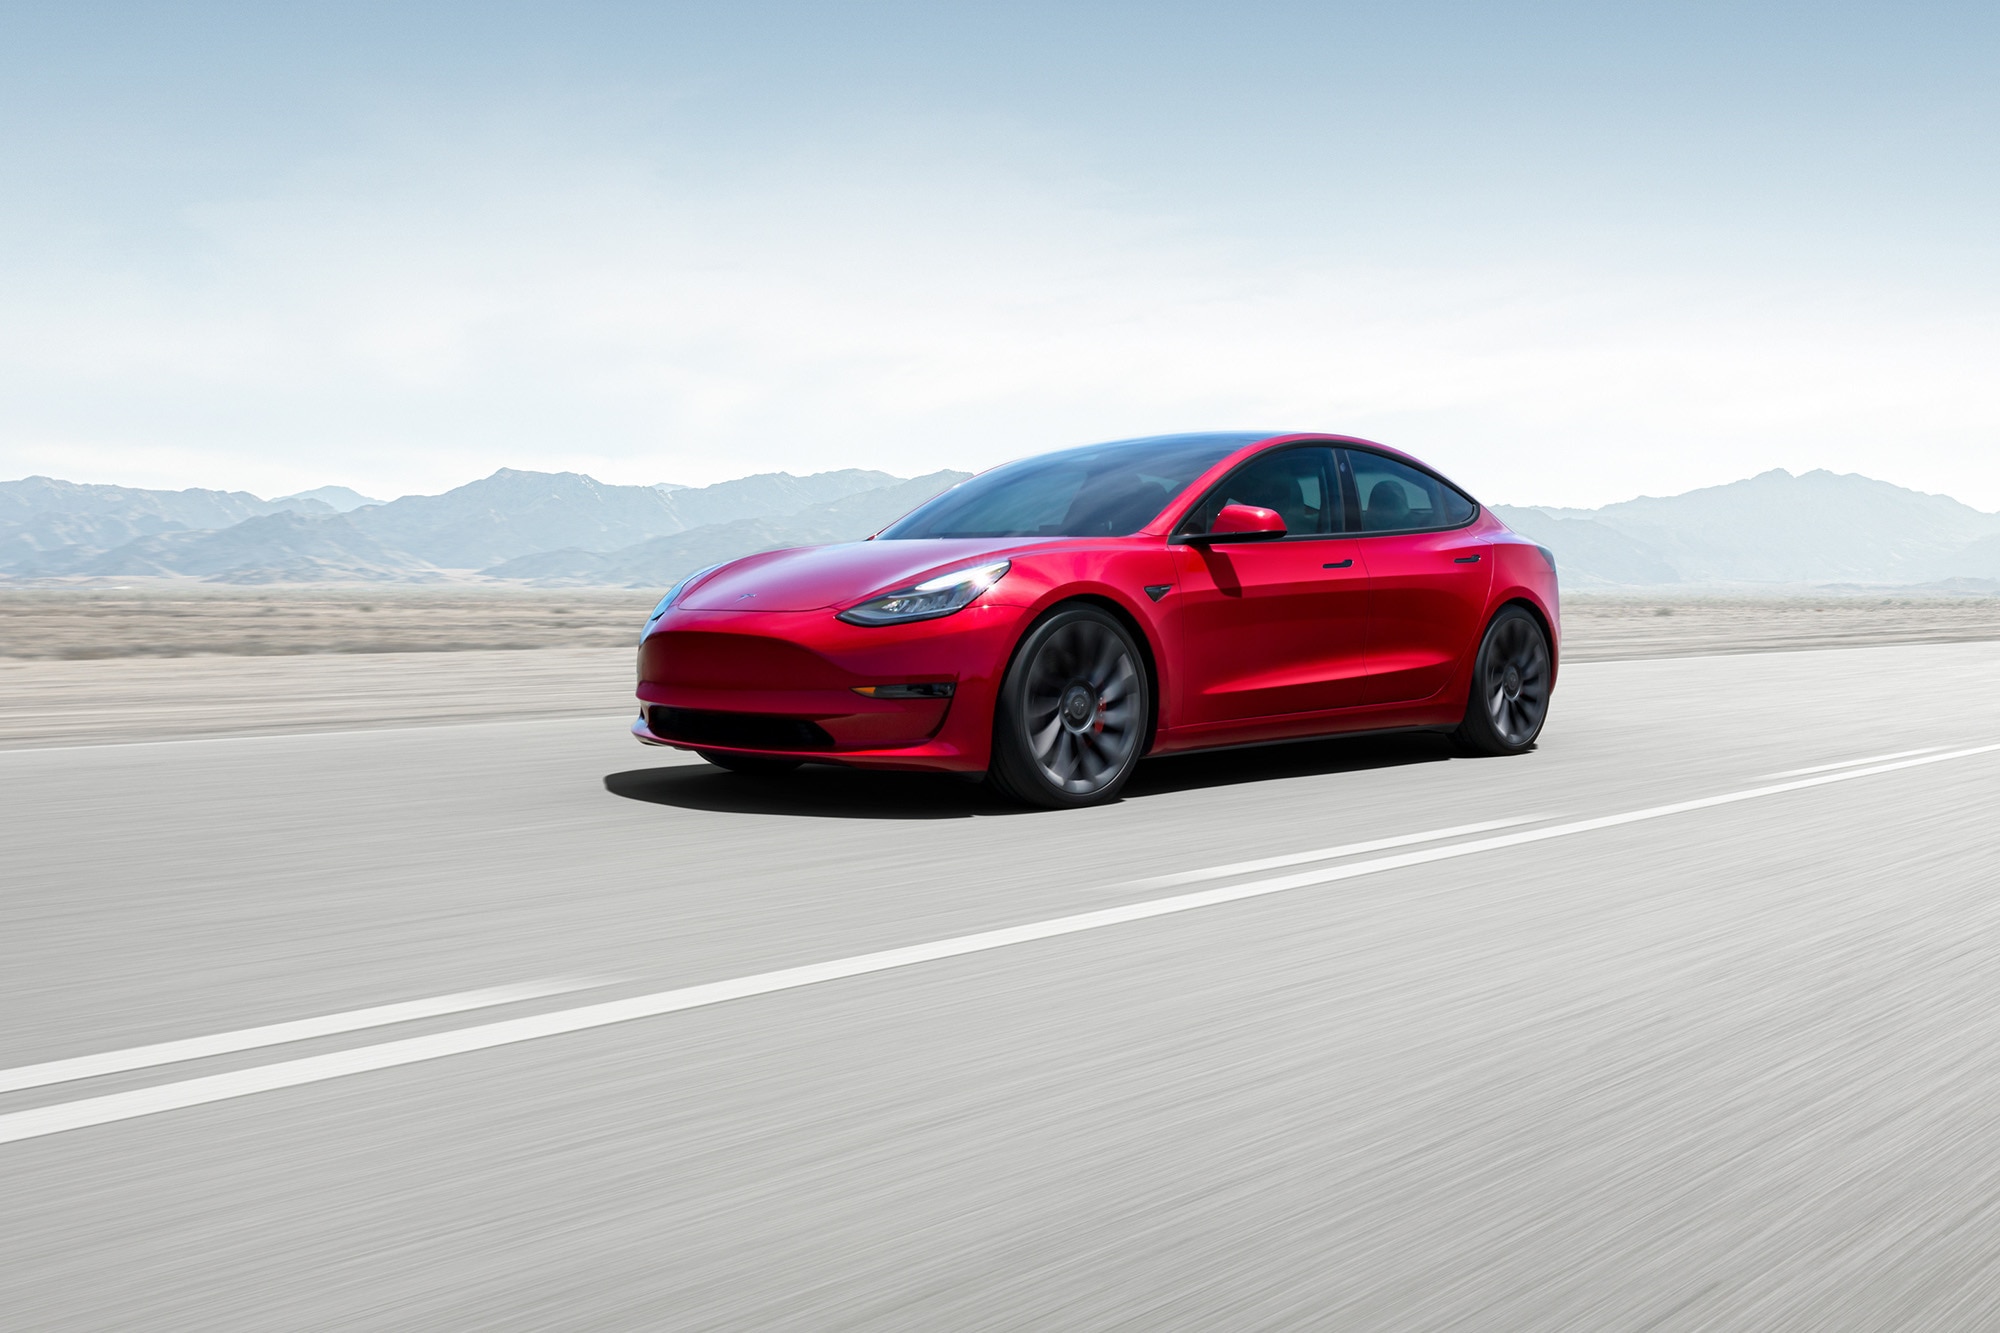 Red Tesla Model 3 driving on paved road with mountains in background.